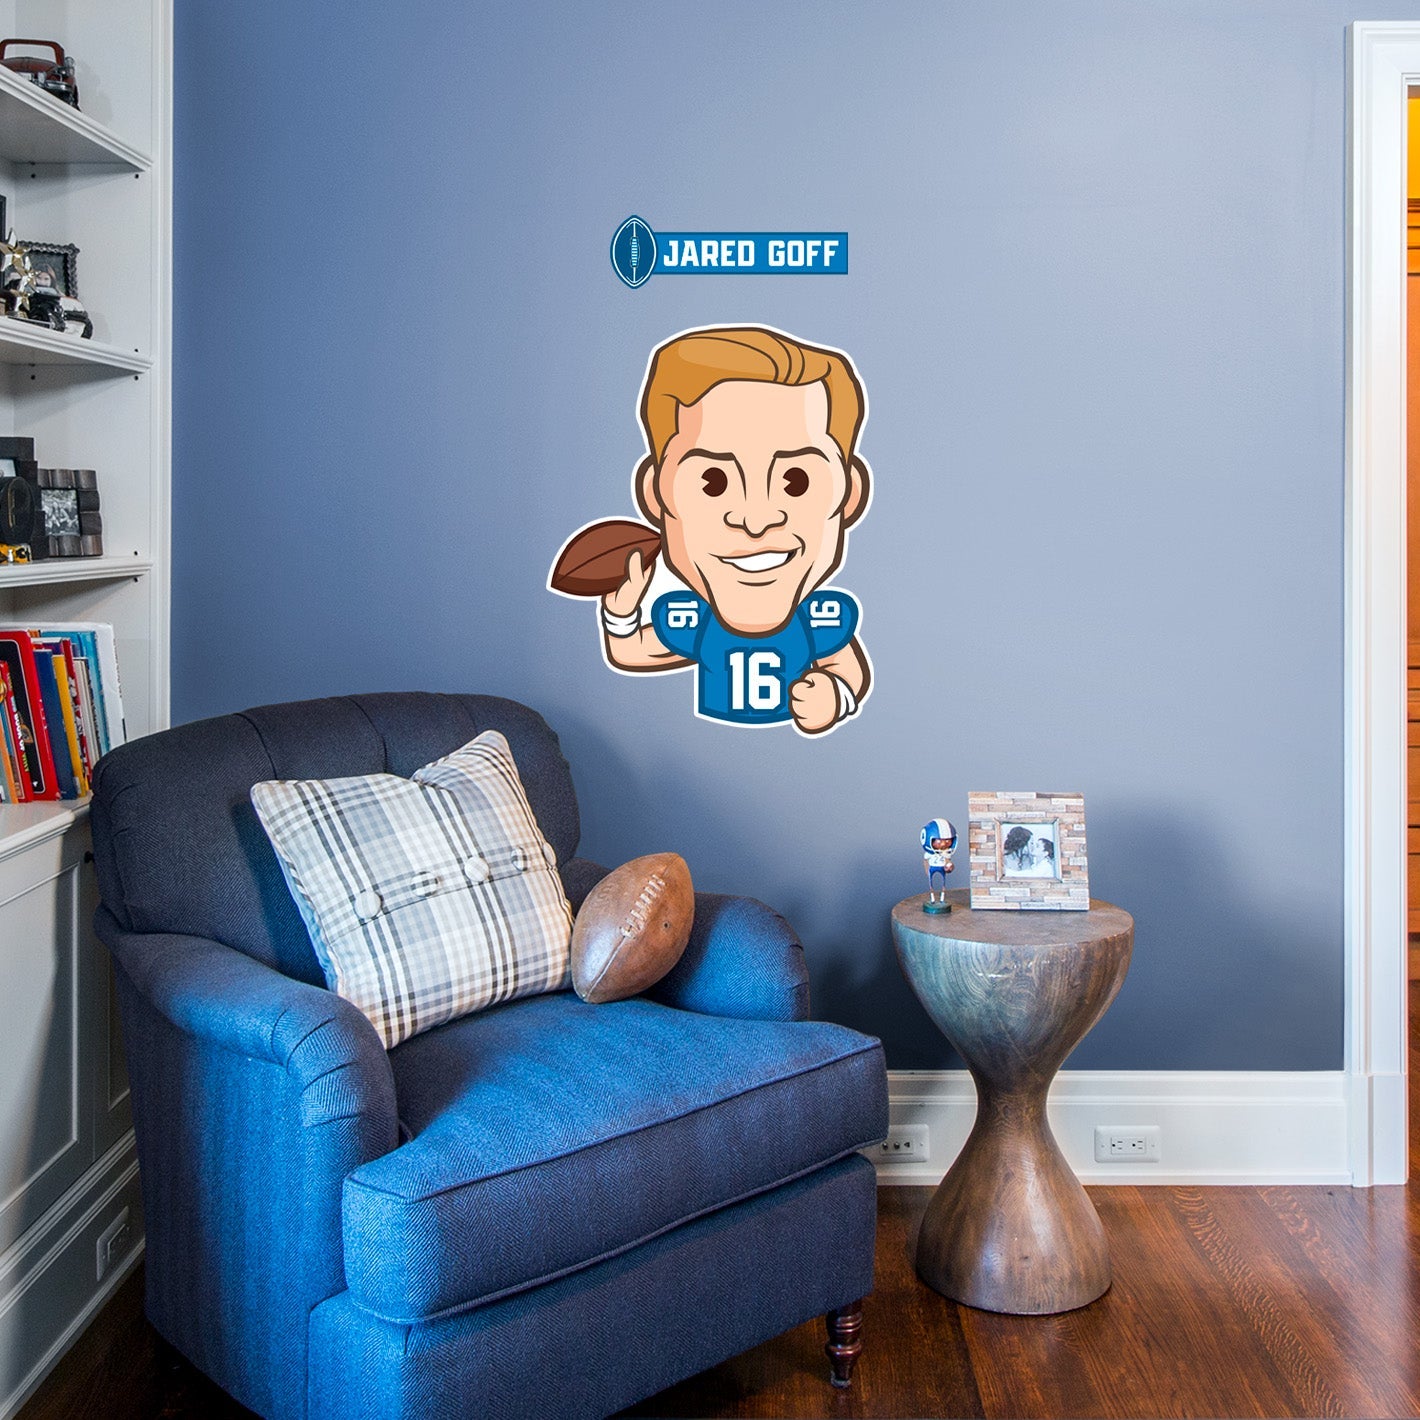 Detroit Lions: Jared Goff Emoji - Officially Licensed NFLPA Removable Adhesive Decal